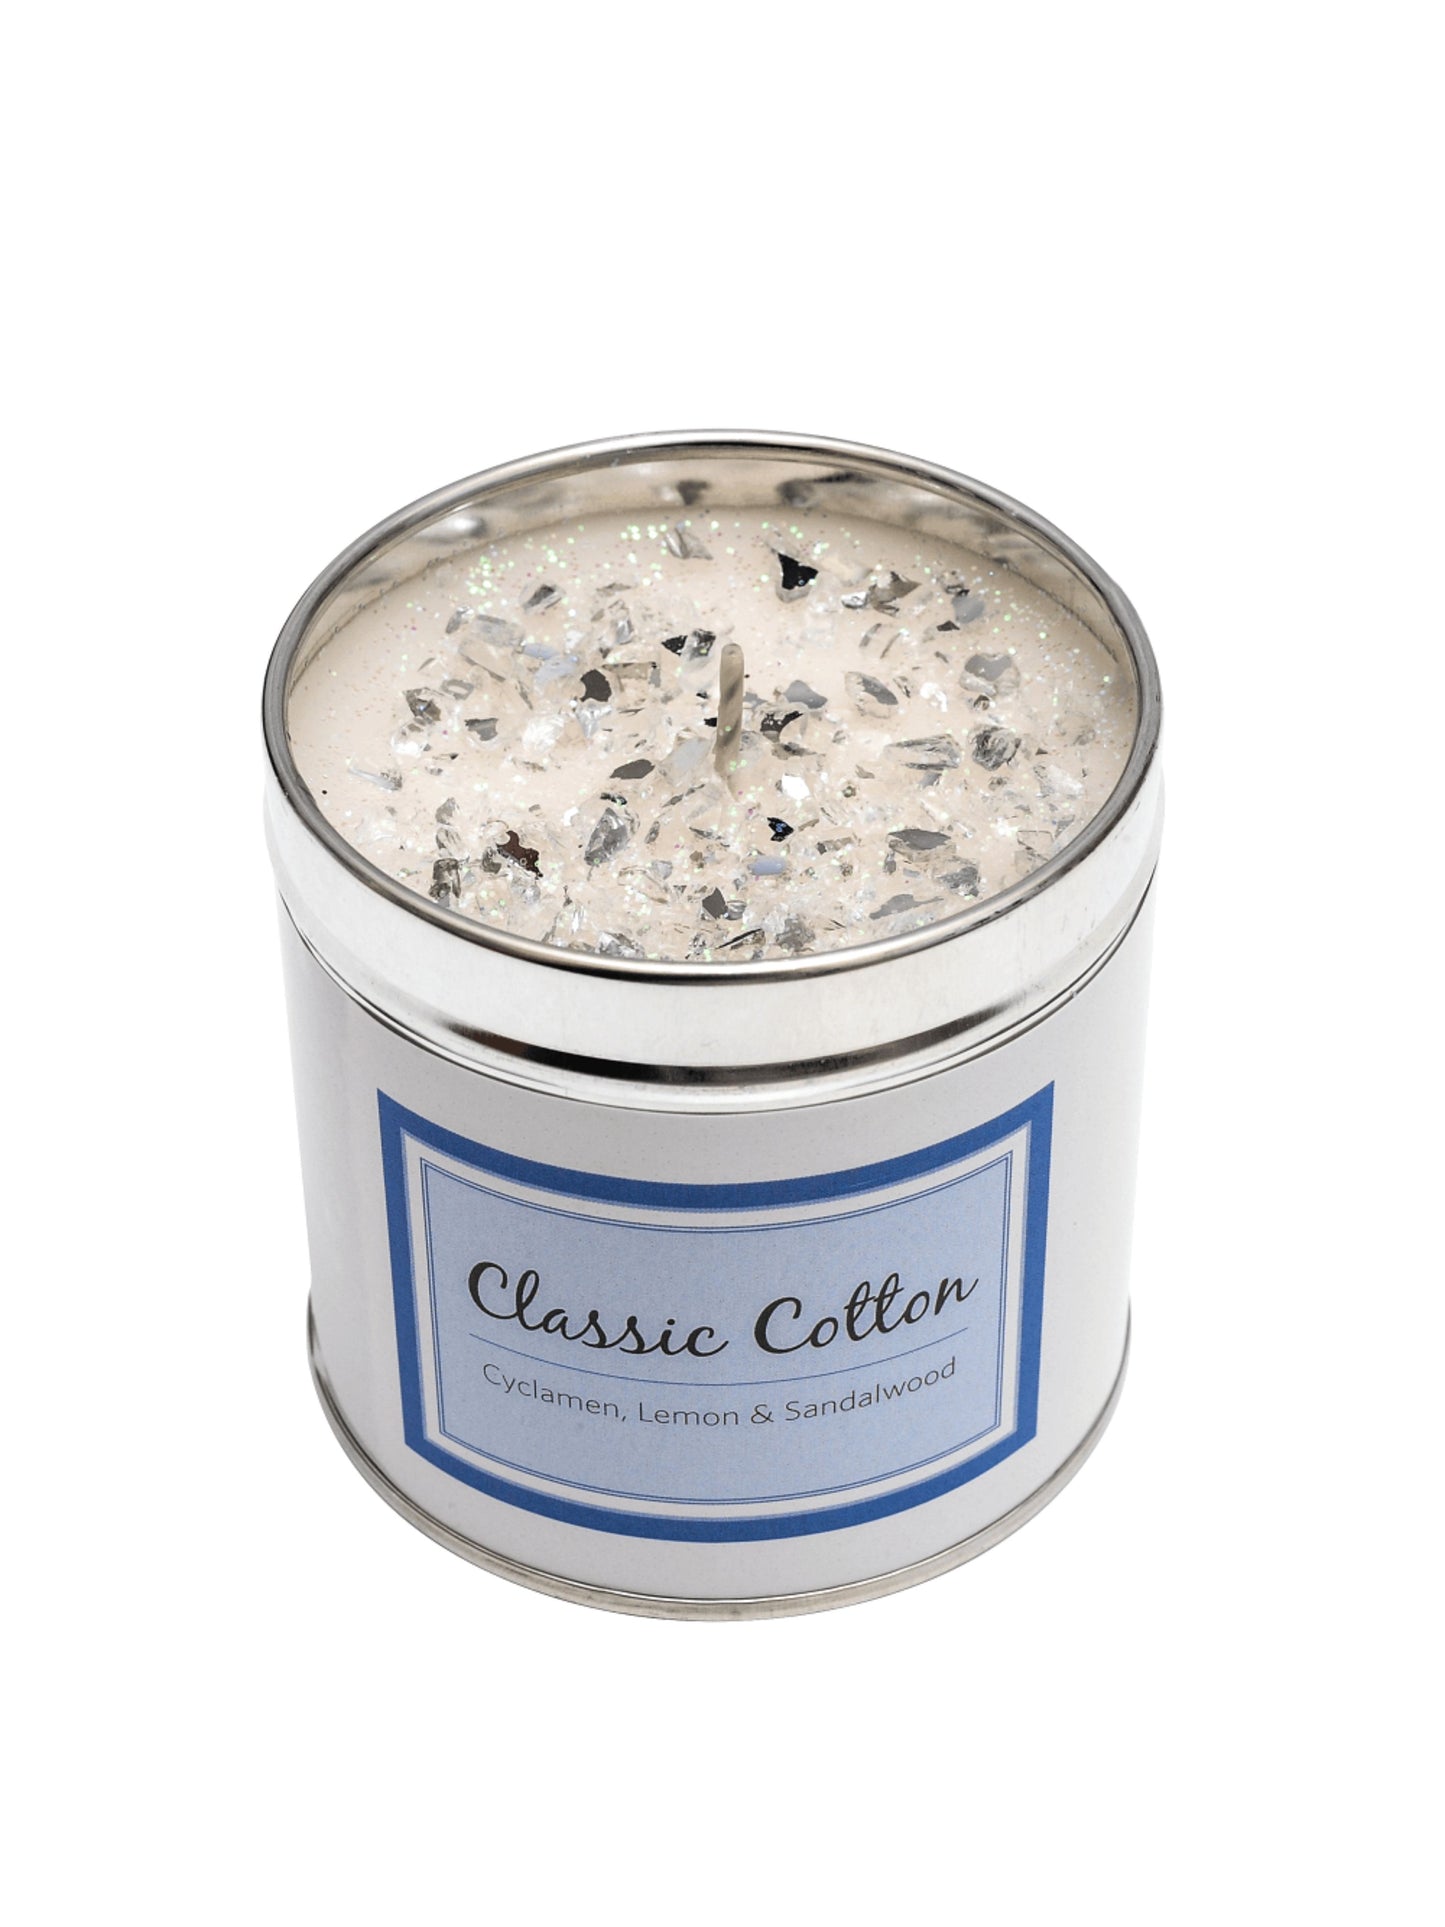 Seriously Scented Candle - Classic Cotton